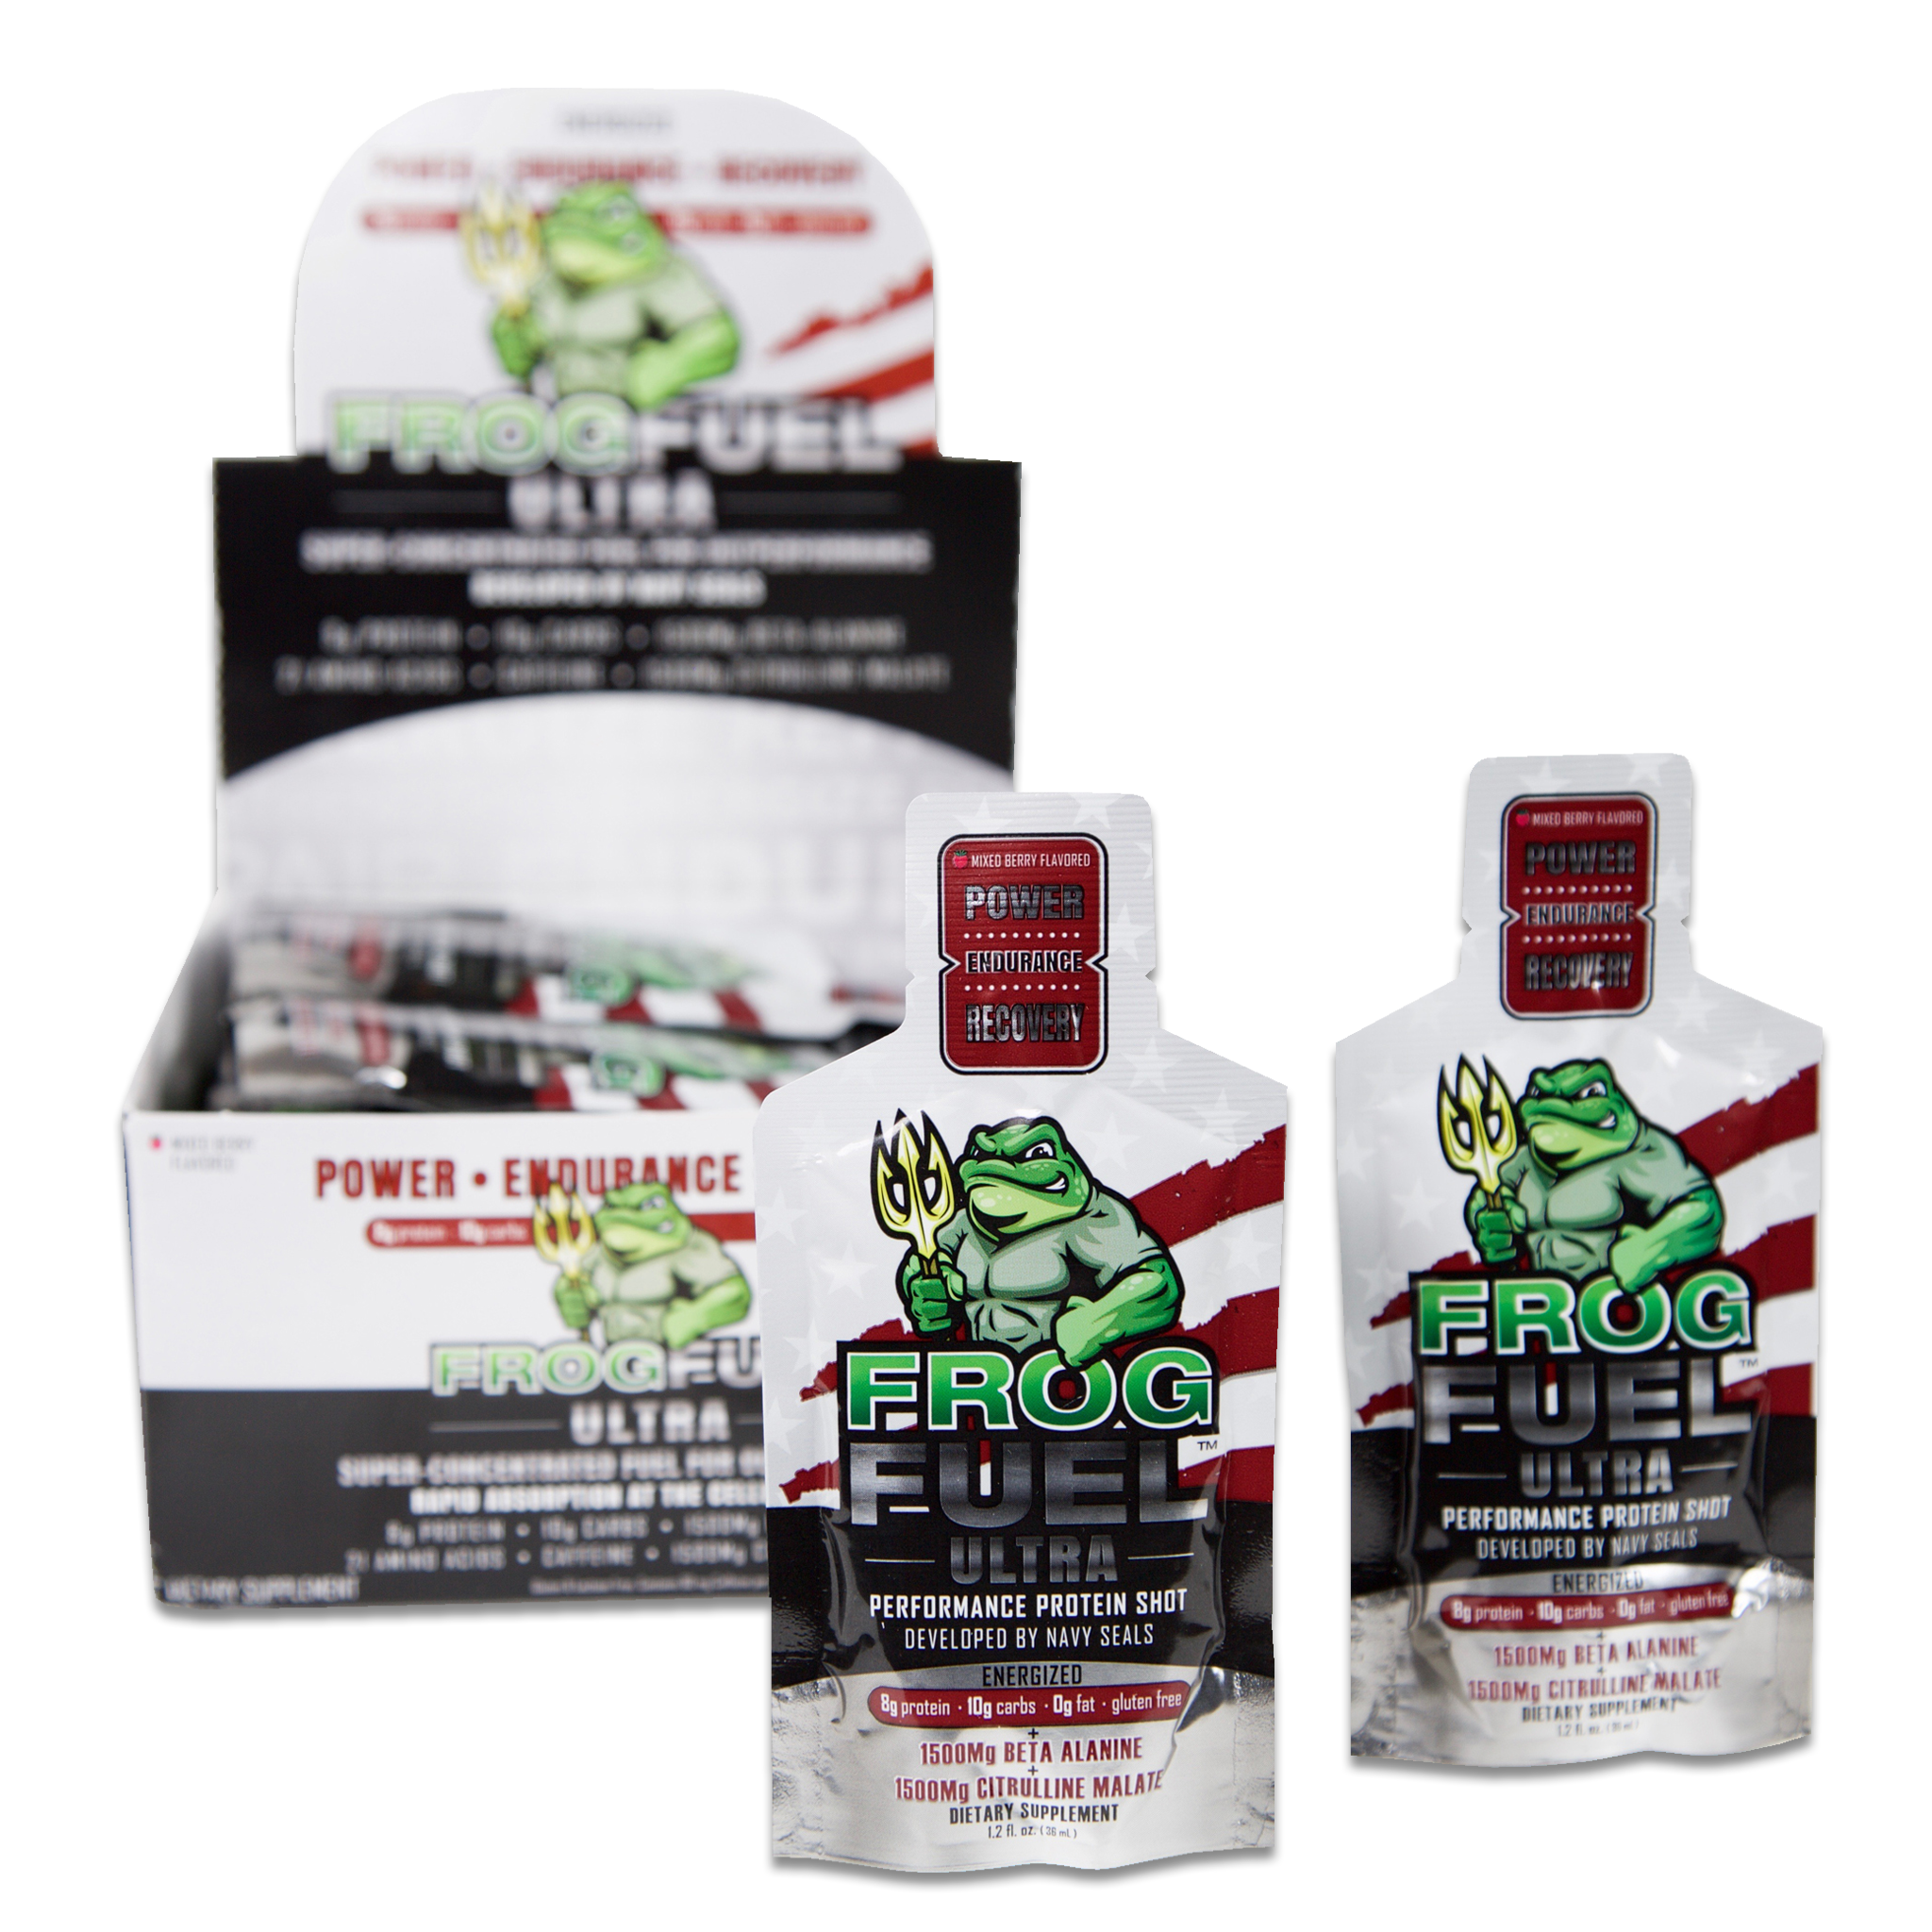 Frog Fuel Ultra Energized ( Box of 24 x 1 oz servings )